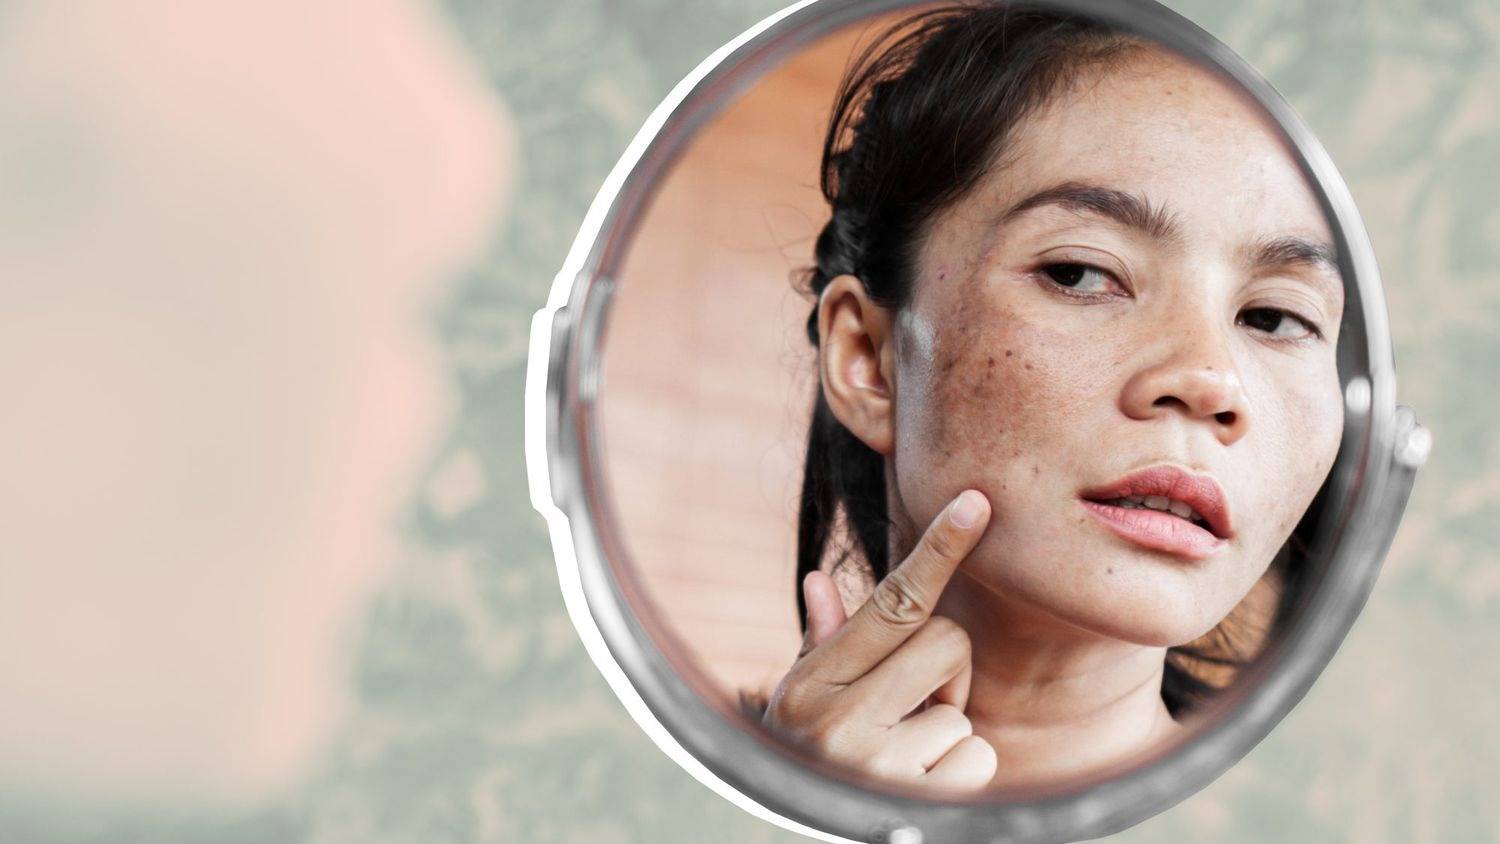 Banish Blemishes Naturally: Home Remedies to Fade Marks and Achieve Clearer Skin